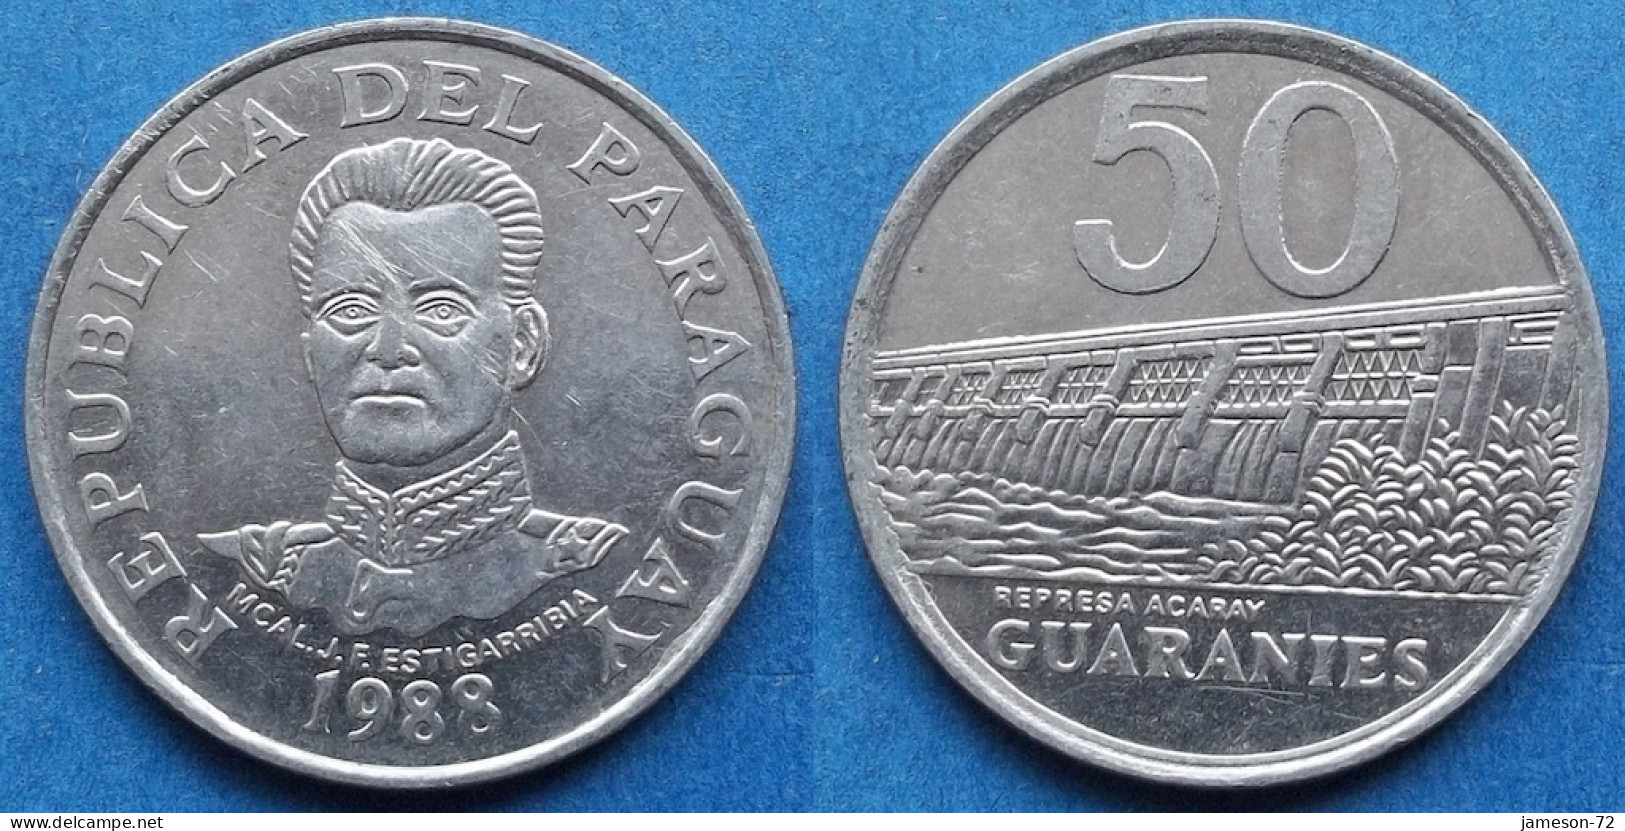 PARAGUAY - 50 Guaranies 1988 "Acaray River Dam" KM# 169 Monetary Reform (1944) - Edelweiss Coins - Paraguay